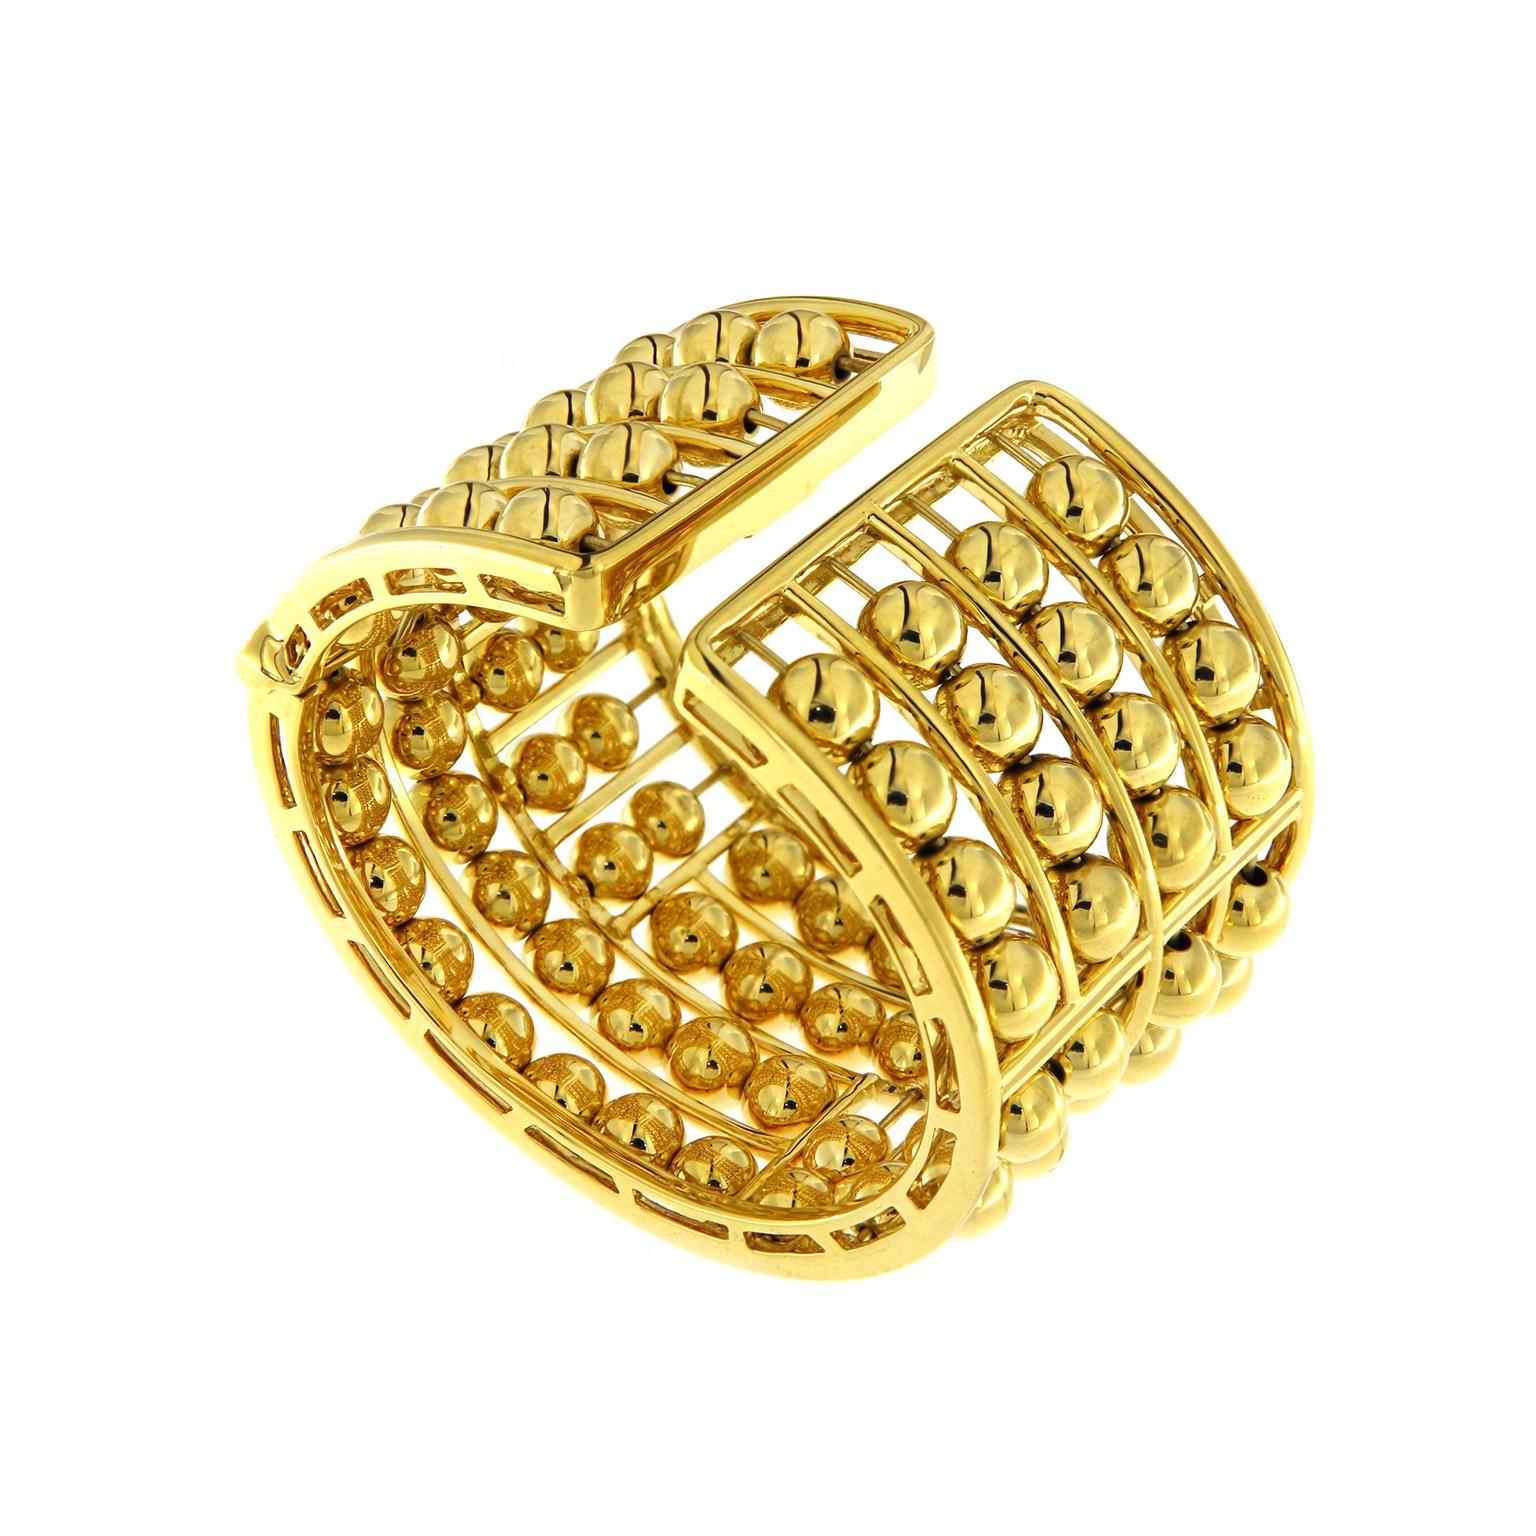 The reflective warmth of 18k yellow gold is the keynote of this cuff bracelet. Orbs of the metal are on coordinating wires of short and long rows. Some of the orbs are strung vertically alongside horizontal rows for visual interest. The result is